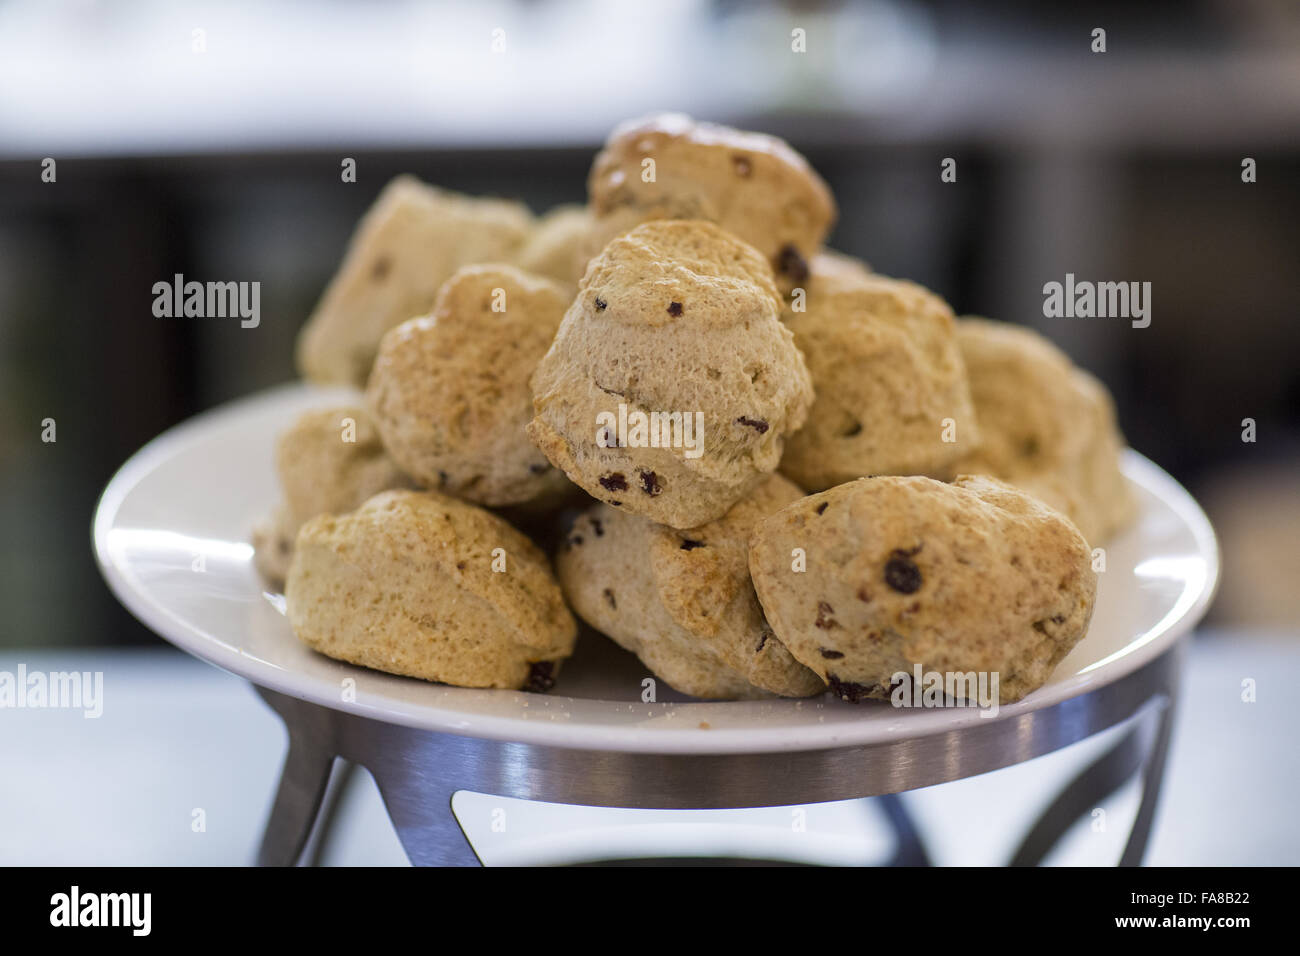 Homemade scones for sale in the Mote Restaurant at Ightham Mote, Kent. Ightham Mote is a medieval moated manor house near Sevenoaks. Stock Photo